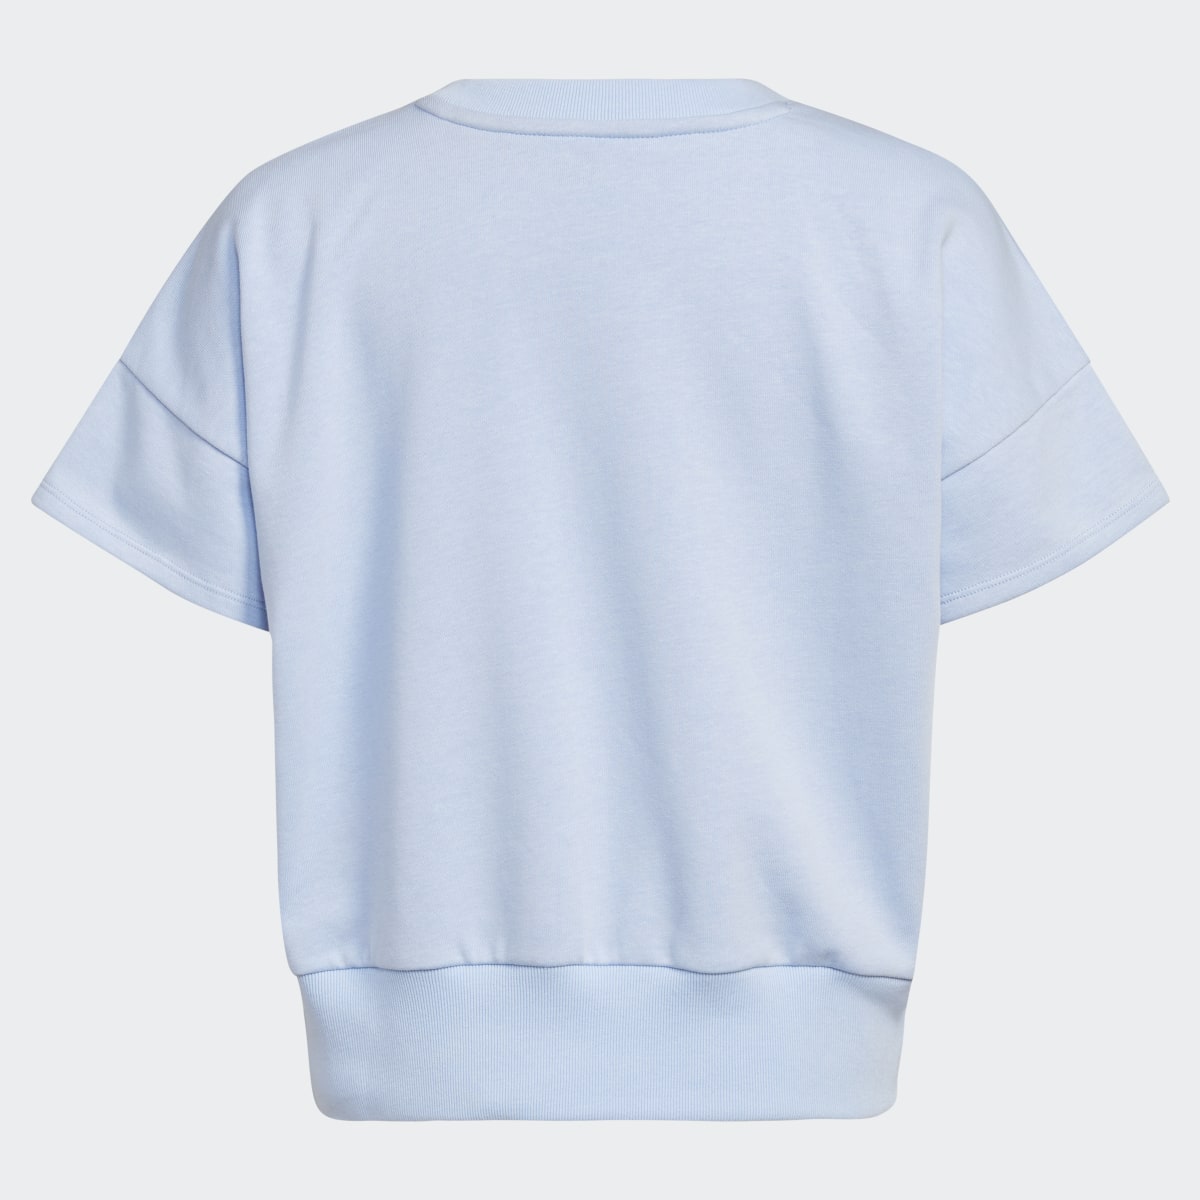 Adidas Short Sleeve French Terry Top. 4